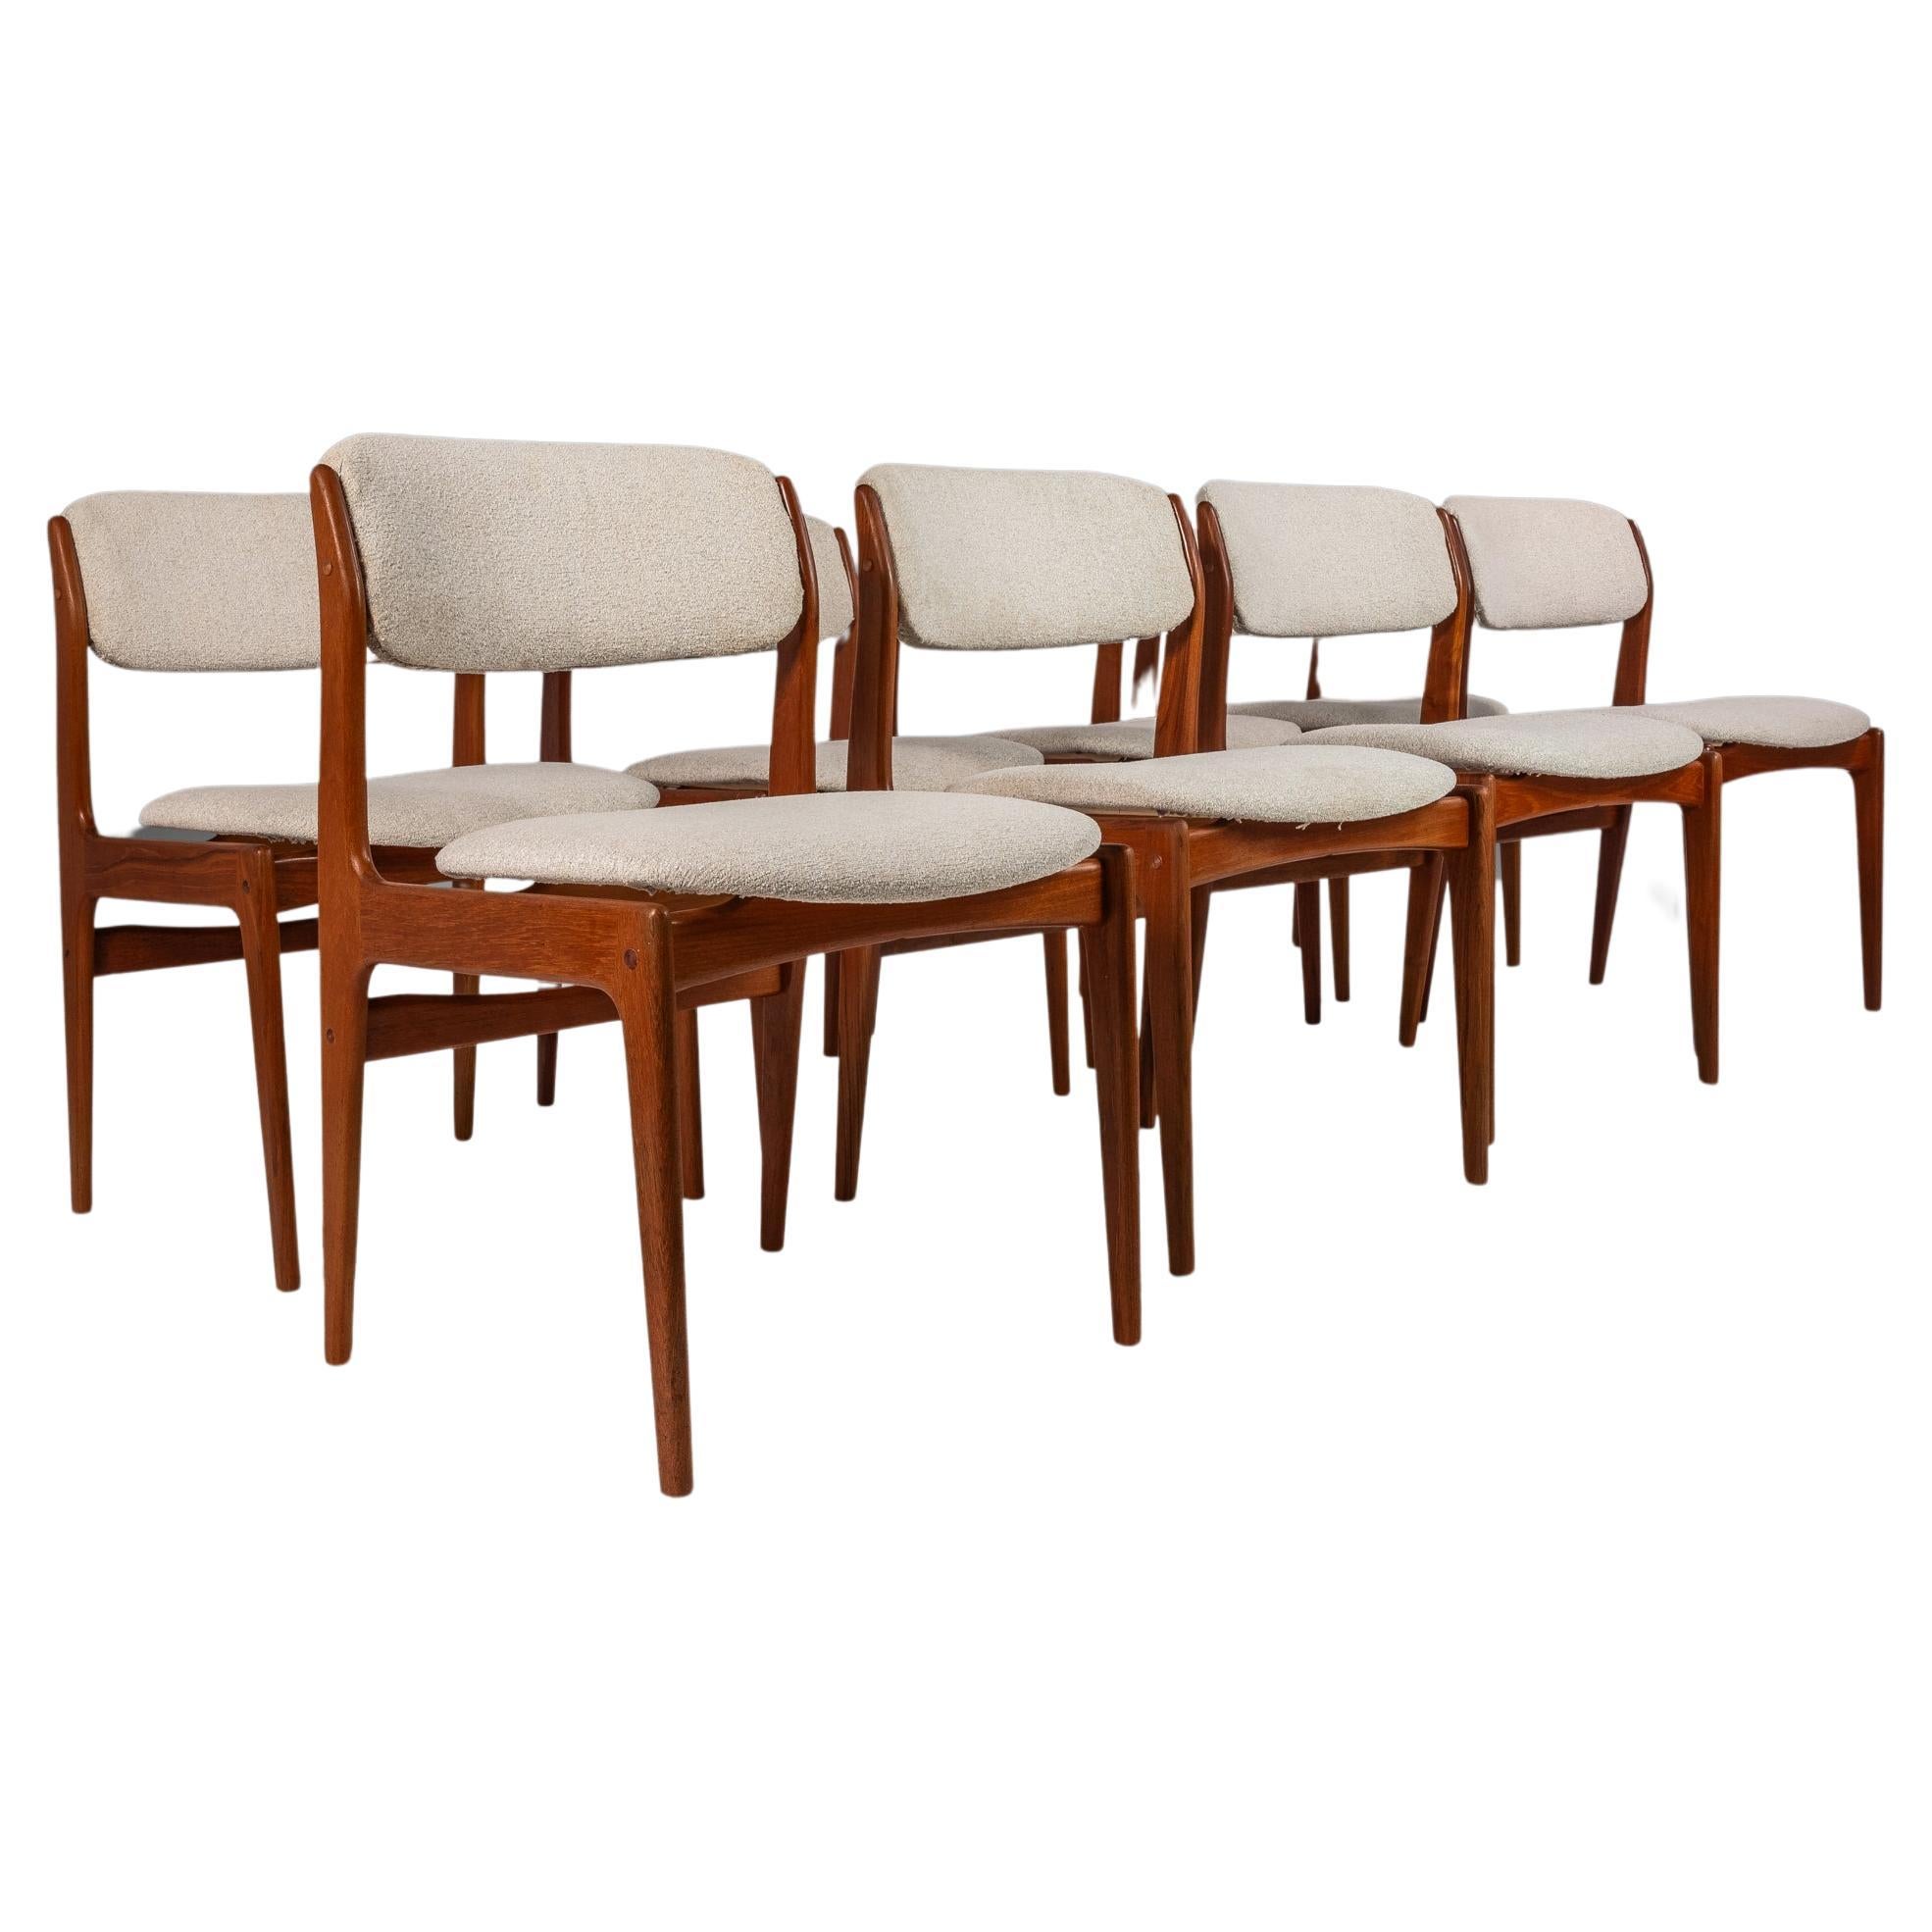 Set of Eight (8) Danish Modern Dining Chairs in Teak by Benny Linden, c. 1970's